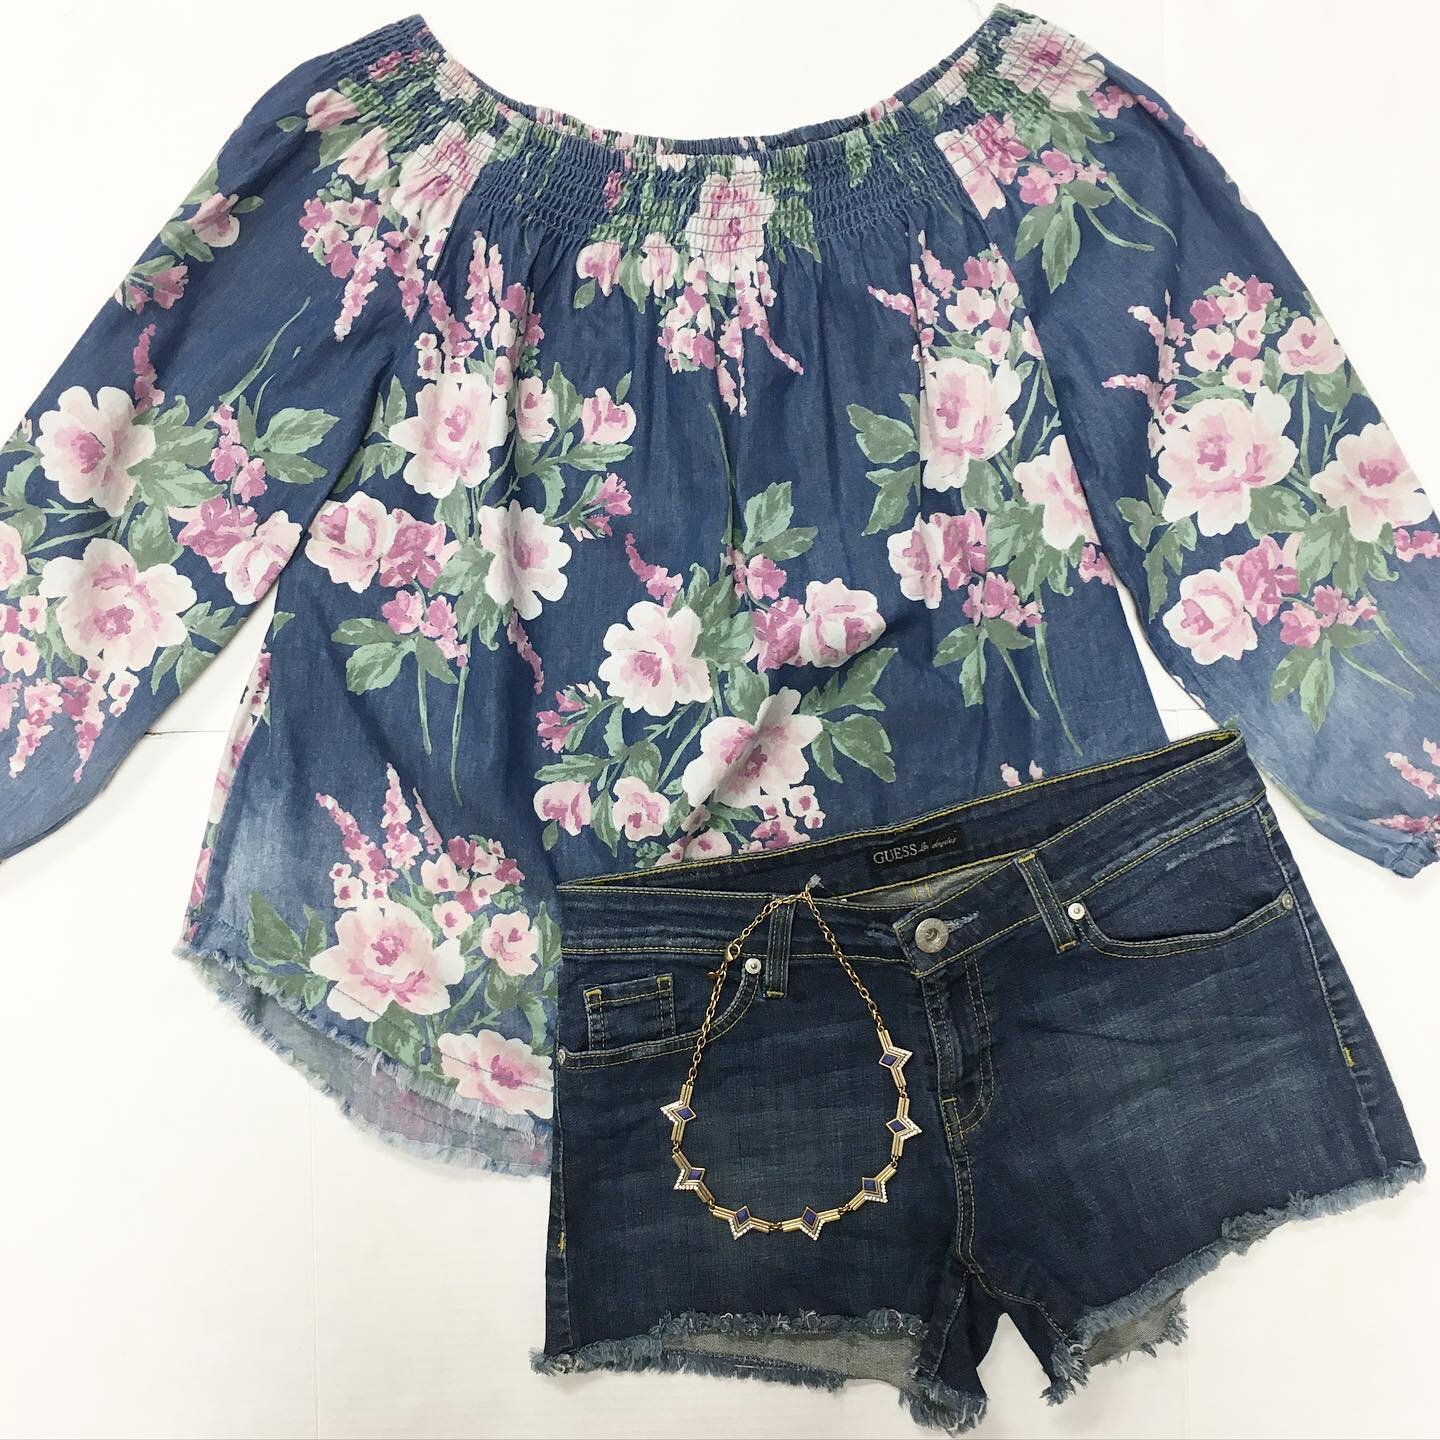 Shorts are here! 🌸

Tribal Jeans Off-the-Shoulder Ombr&eacute; Top Medium (Sold)
Guess Jeans Shorts Size 29 $22
J Crew Necklace $25

#wildflowersconsignmentboutique #consignmentboutique #consignmentfinds #secondhandstyle #ecofriendly #relove #tribal